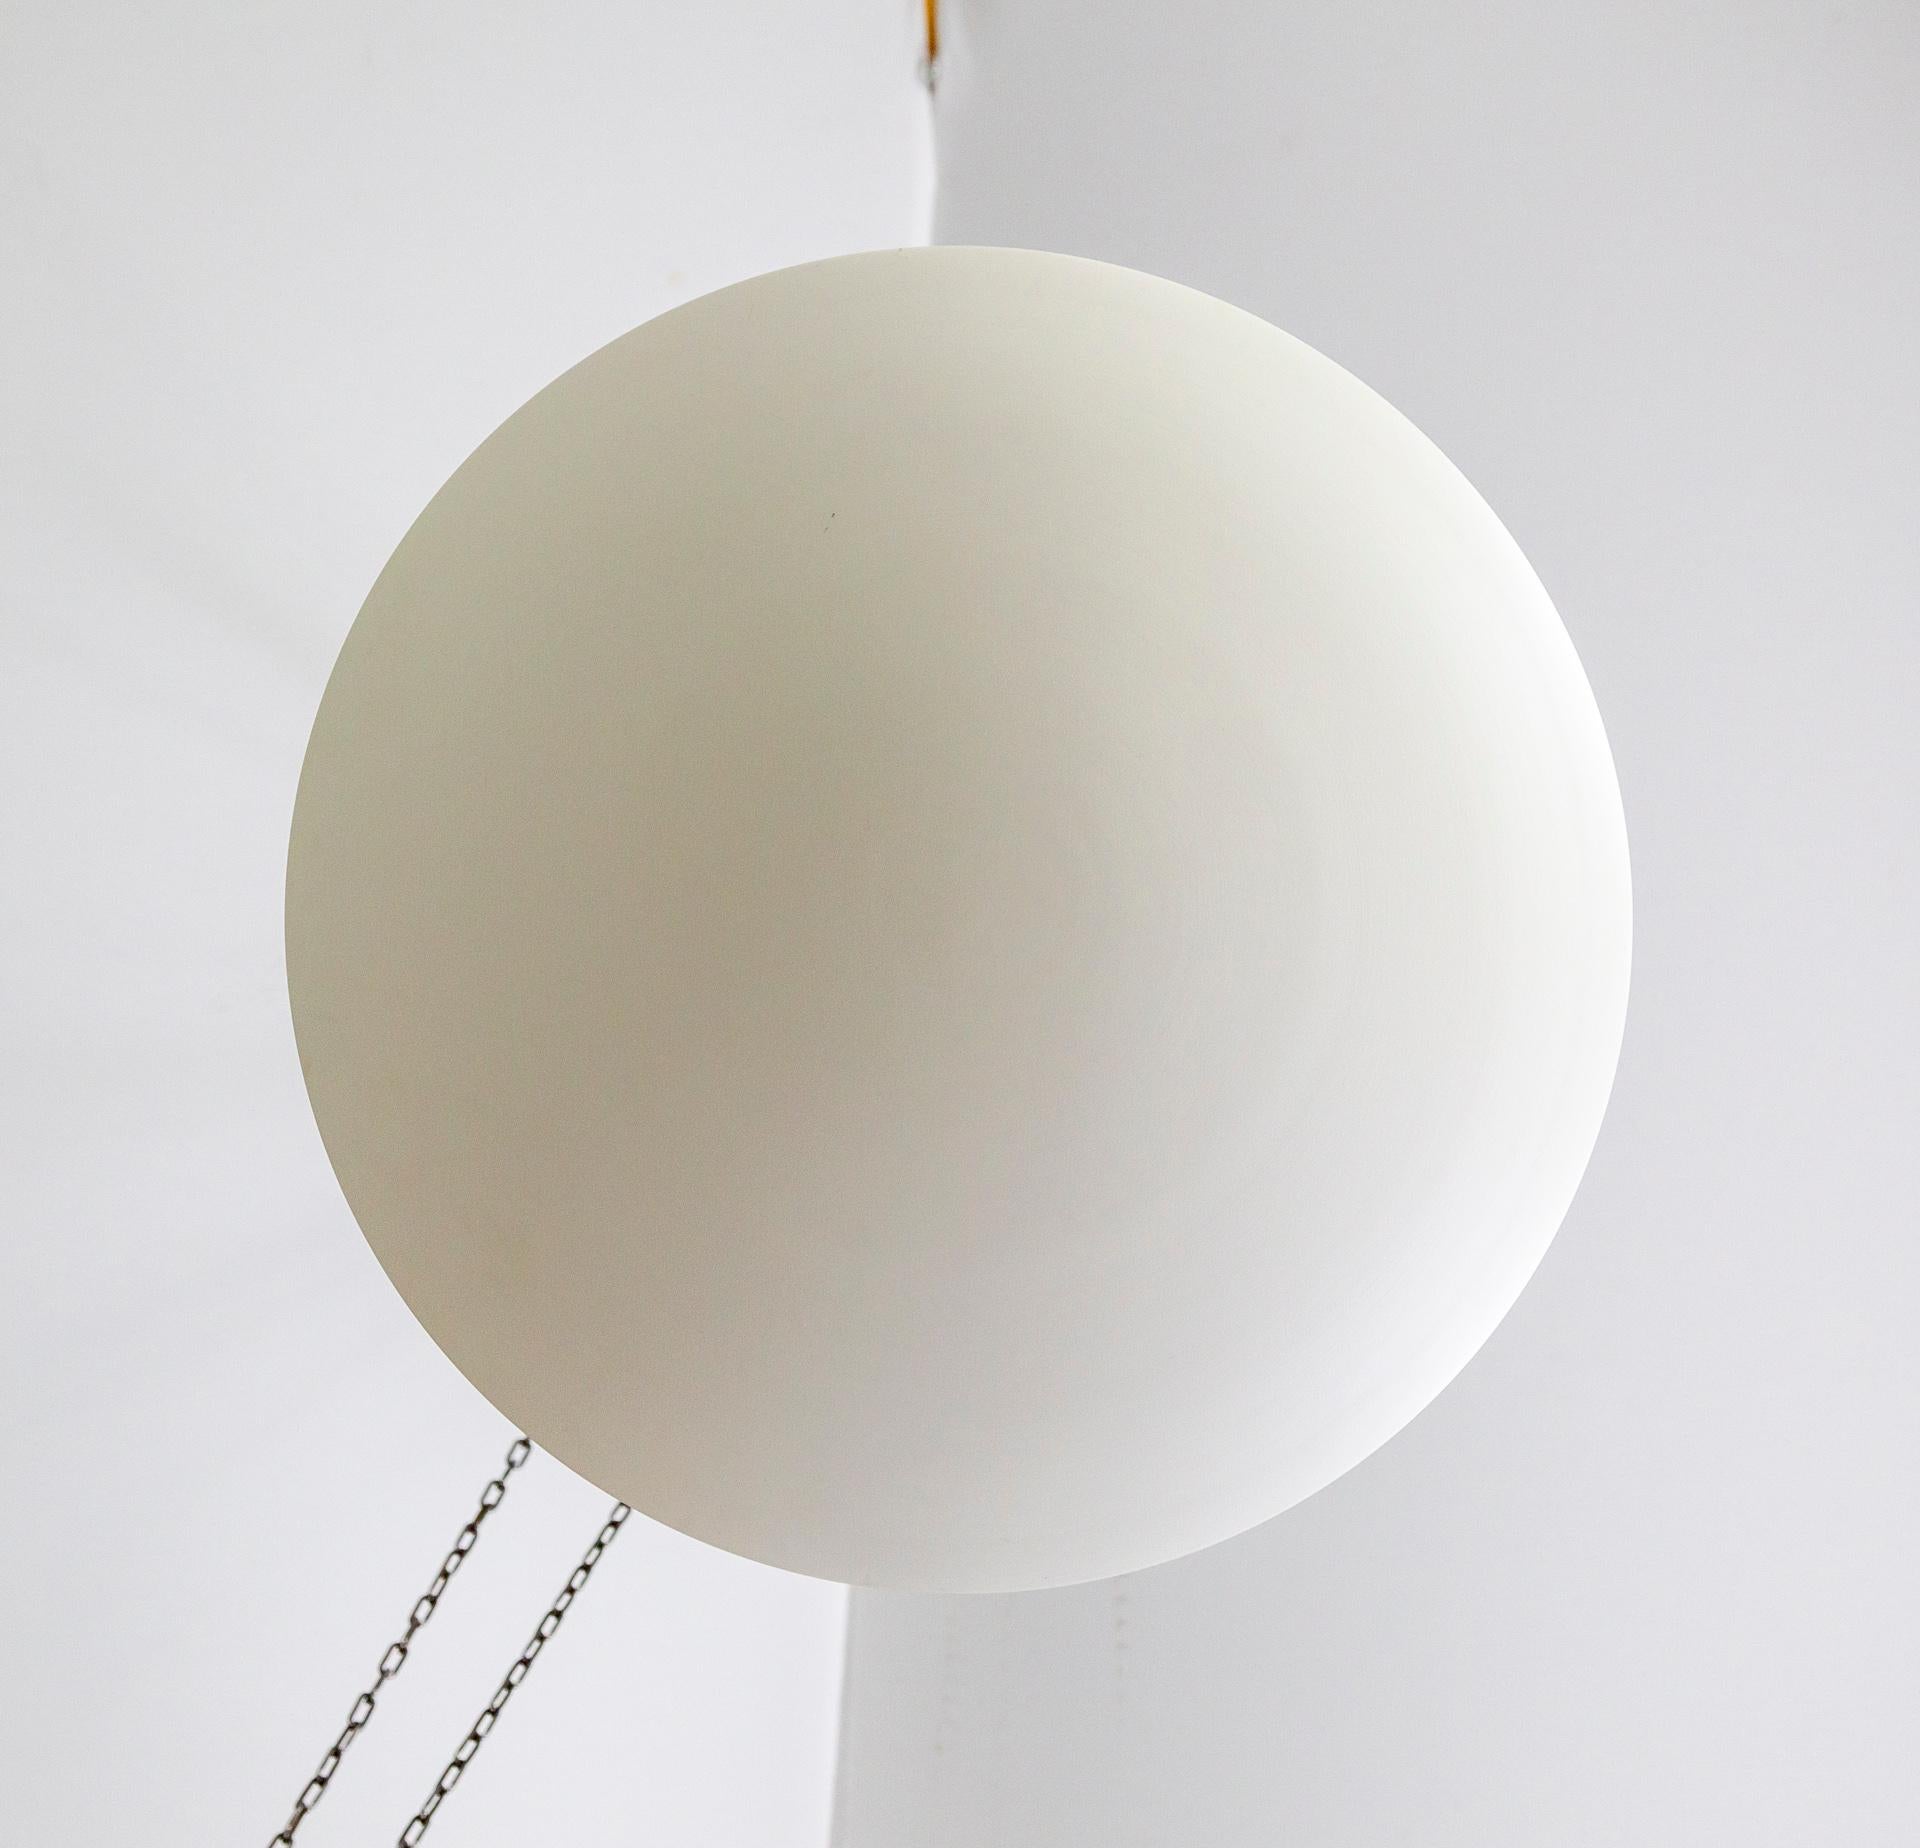 A matte-white, spun aluminum, convex disk up-light fixture in a minimal, modern design.  It hangs roughly 8 inches from the ceiling to cast a pleasing, diffused light.  It is versatile and complements many styles. Made in California by Nova